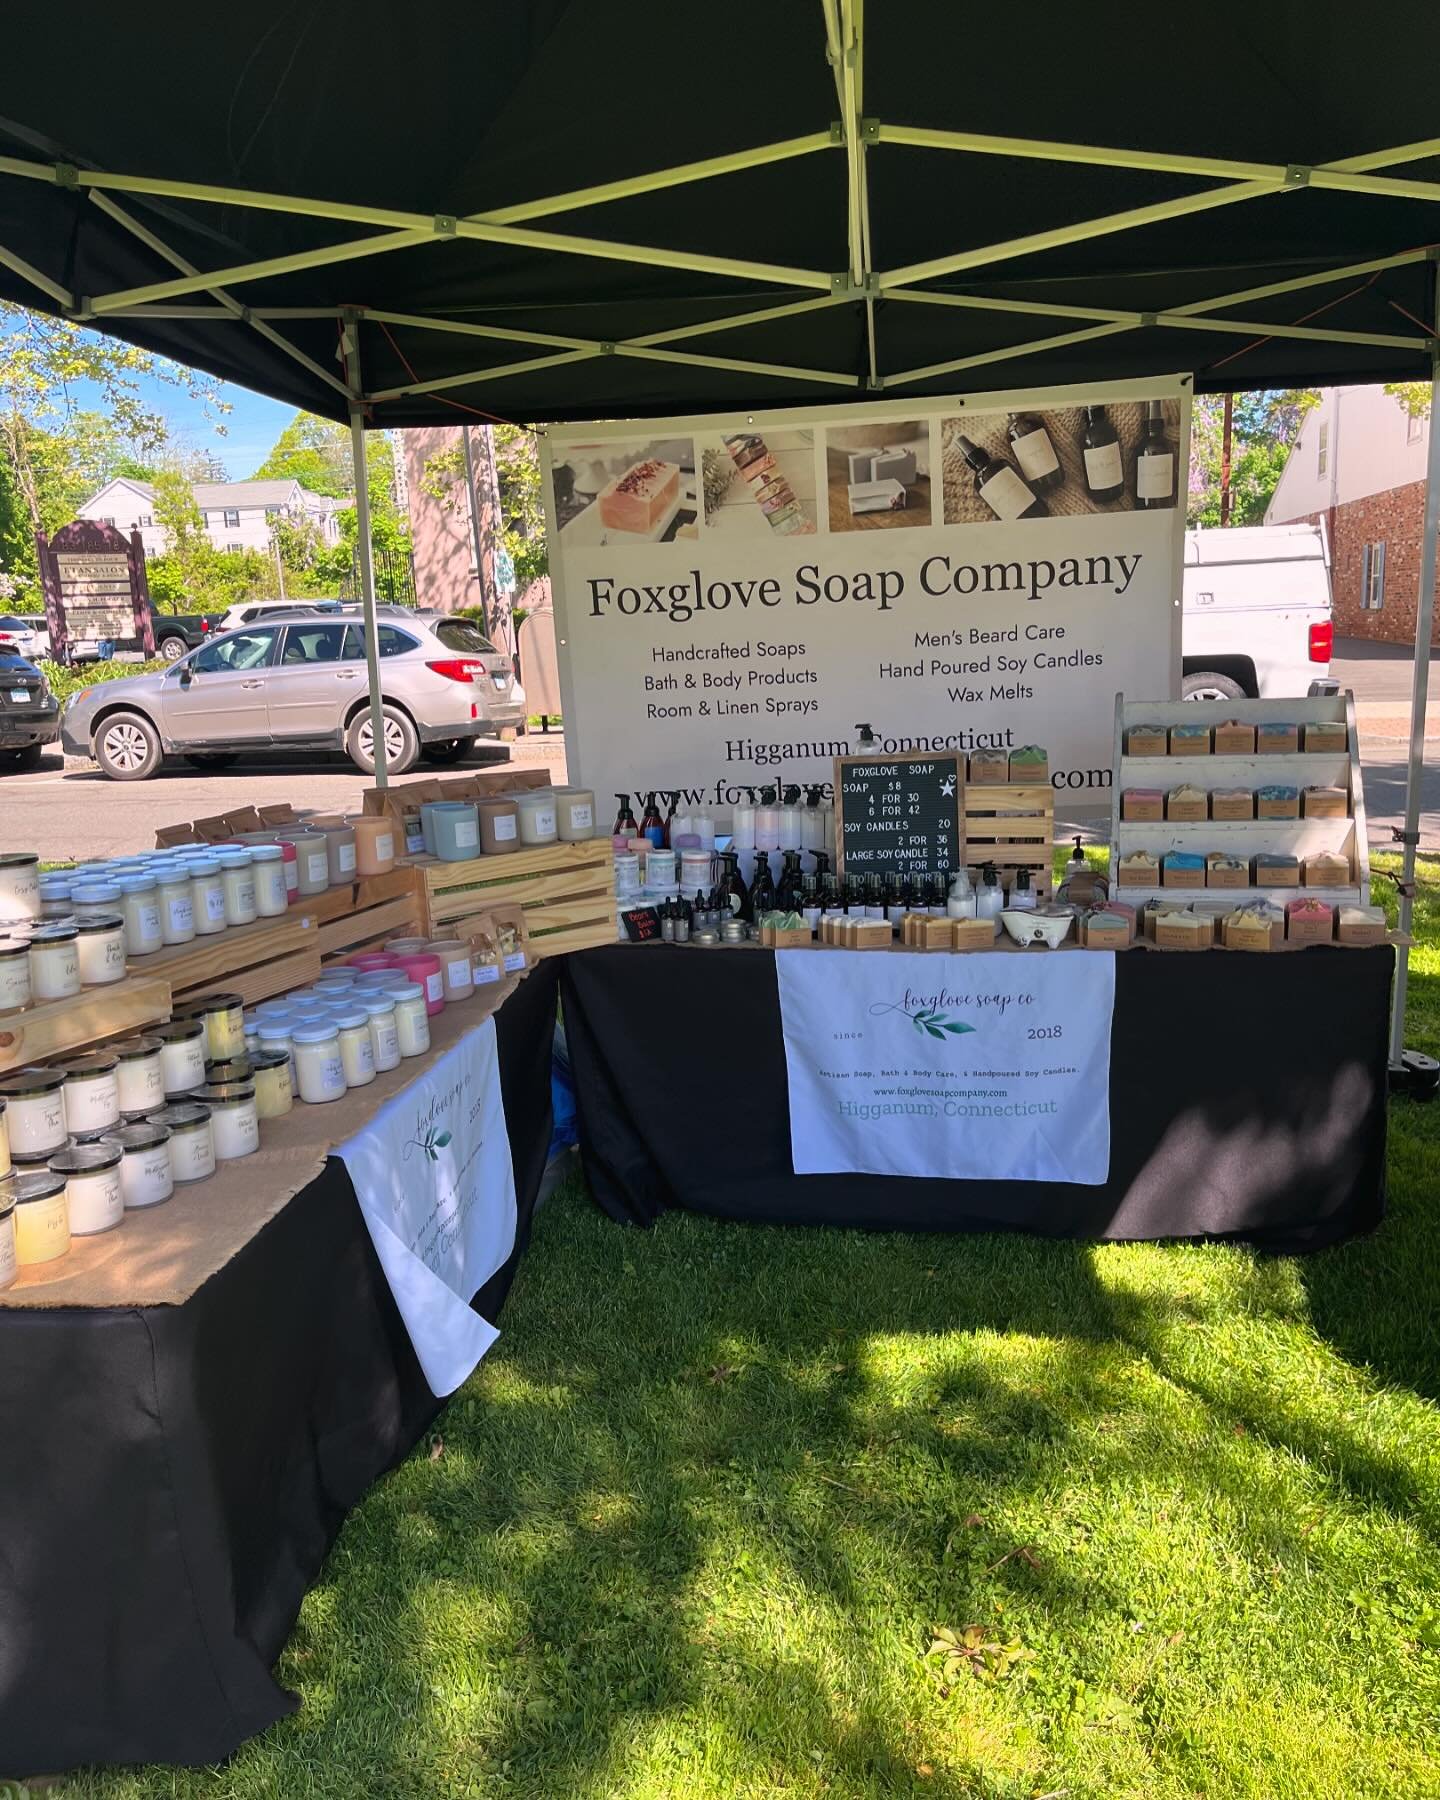 All set up at the Milford Green today and tomorrow 10-4. Lots of your favorites and don&rsquo;t forget Mom!
#smallbusiness #soapmaking #candlemaking #localbusiness #foxglovesoapcompany